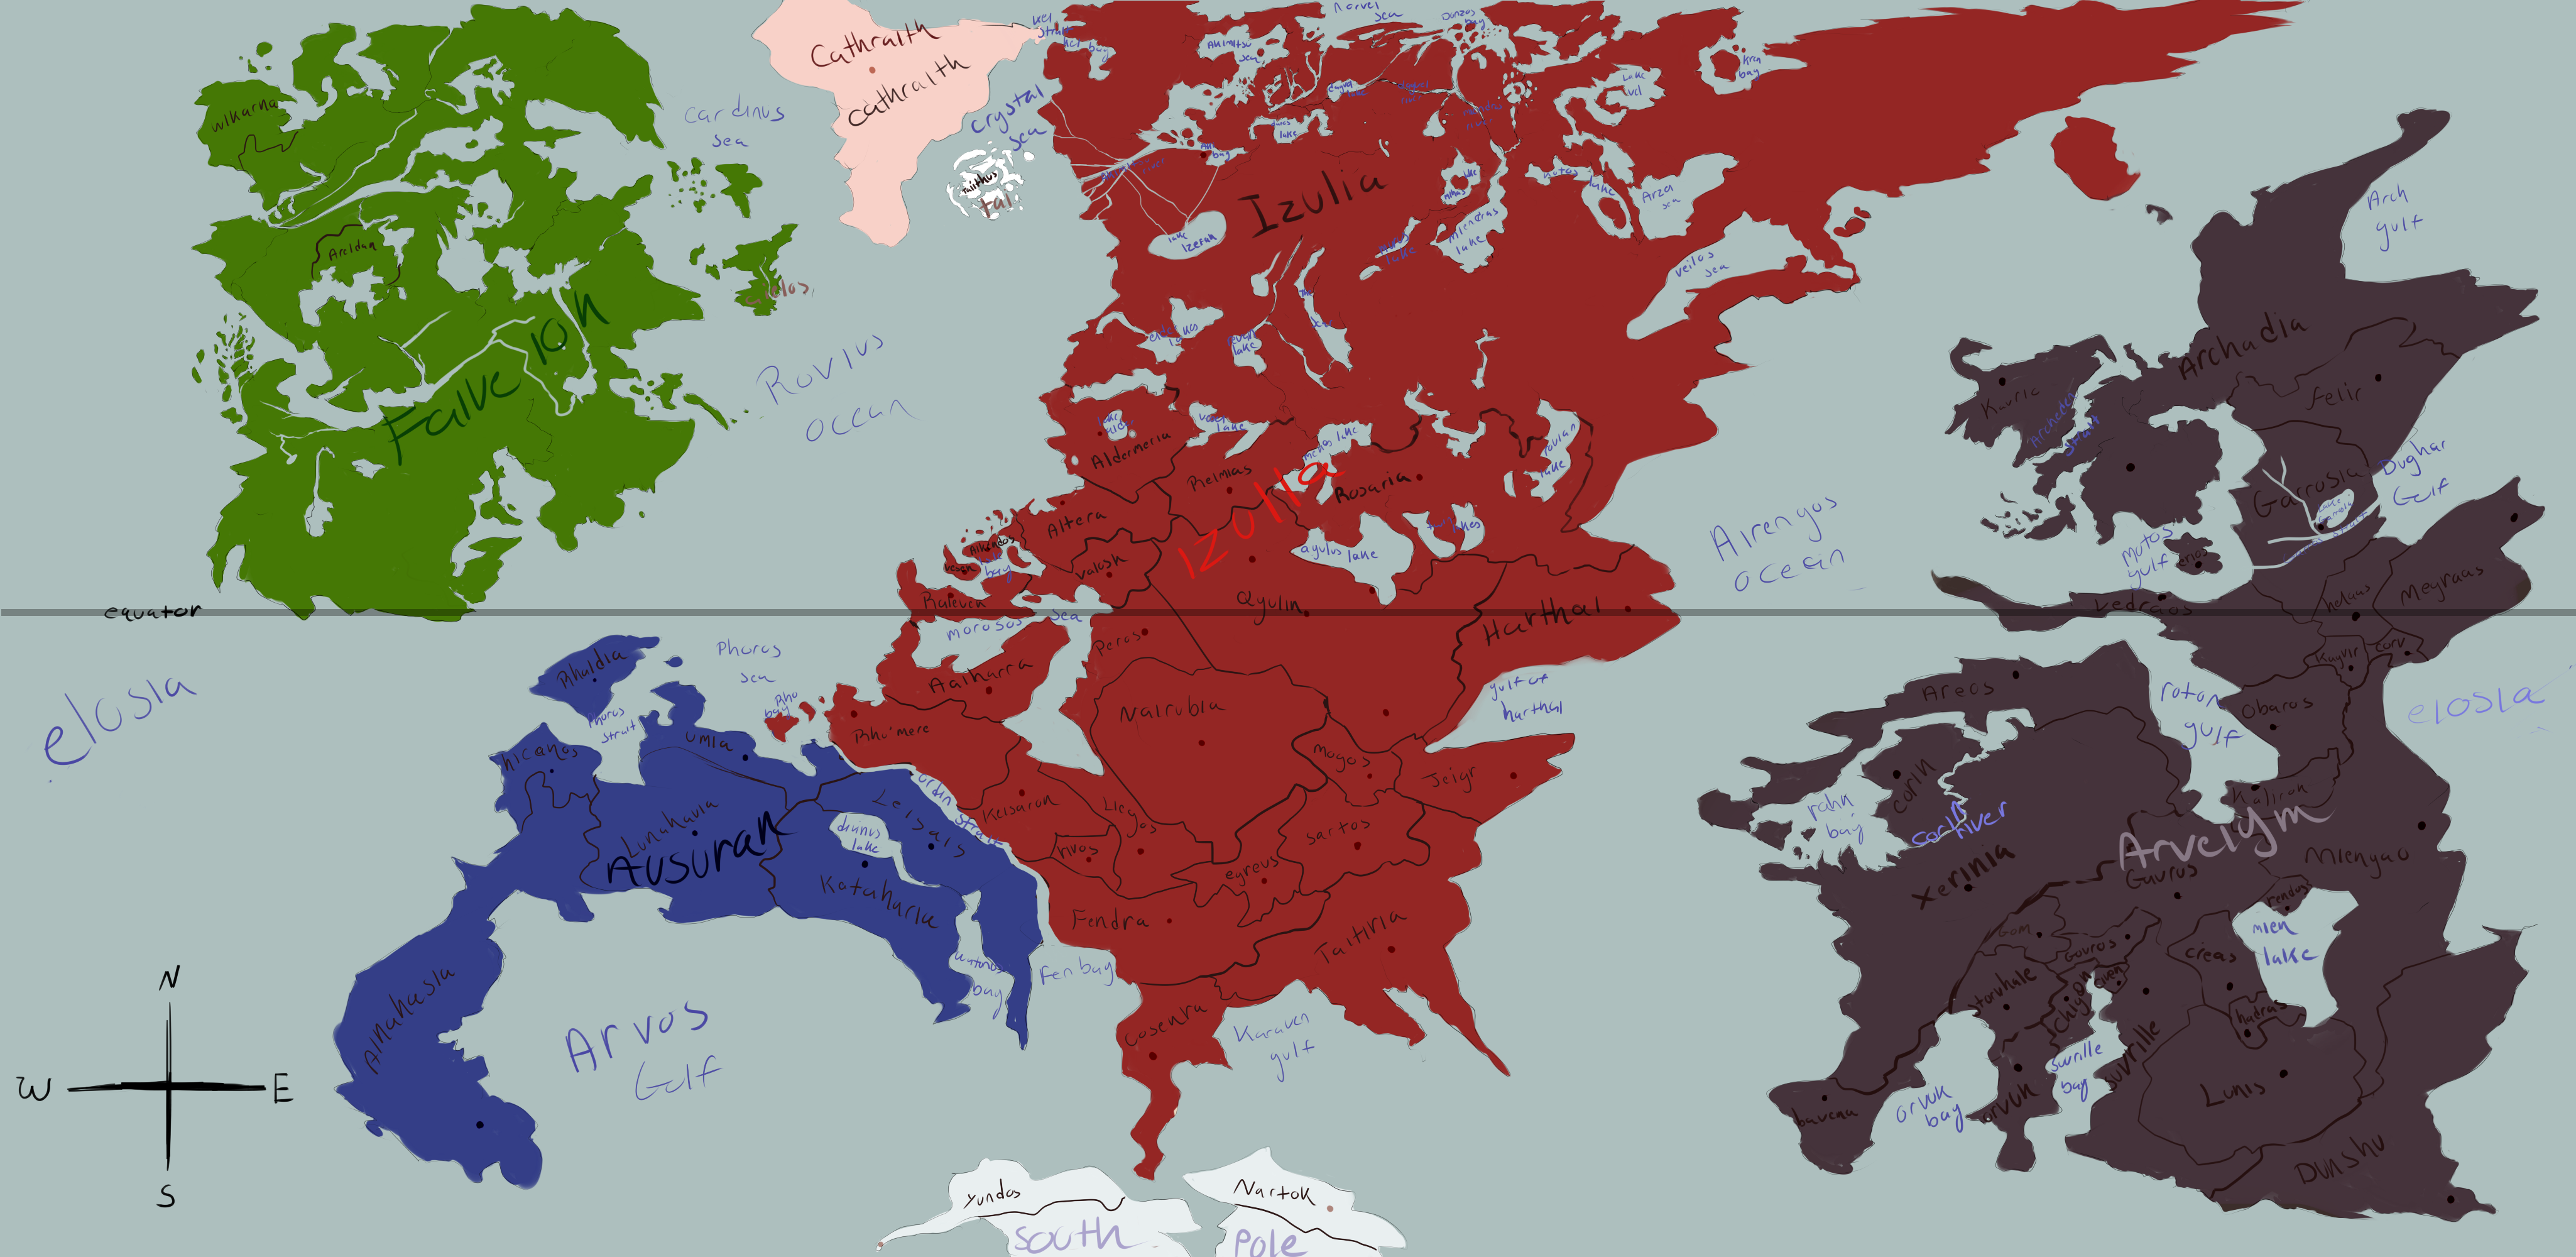 world_map_new_by_lucidhowl-db1d3k7.png